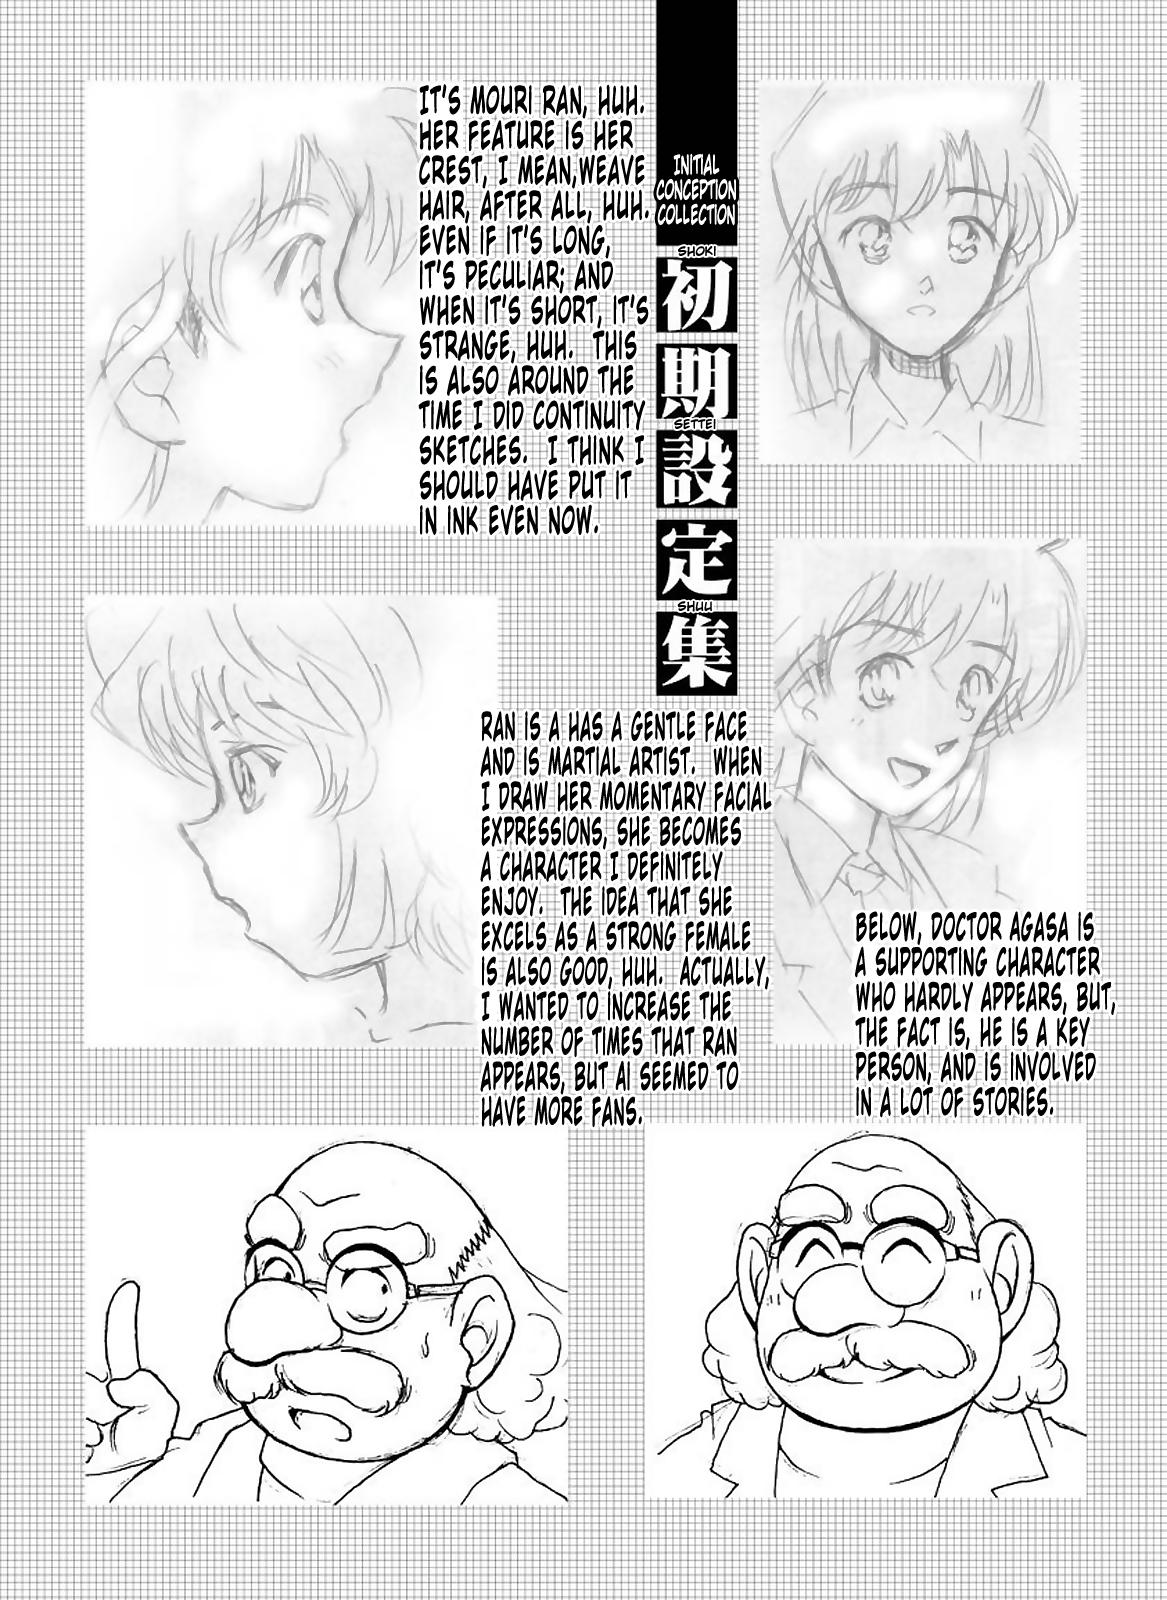 Bumbling Detective Conan - File 12: The Case of Back To The Future 24